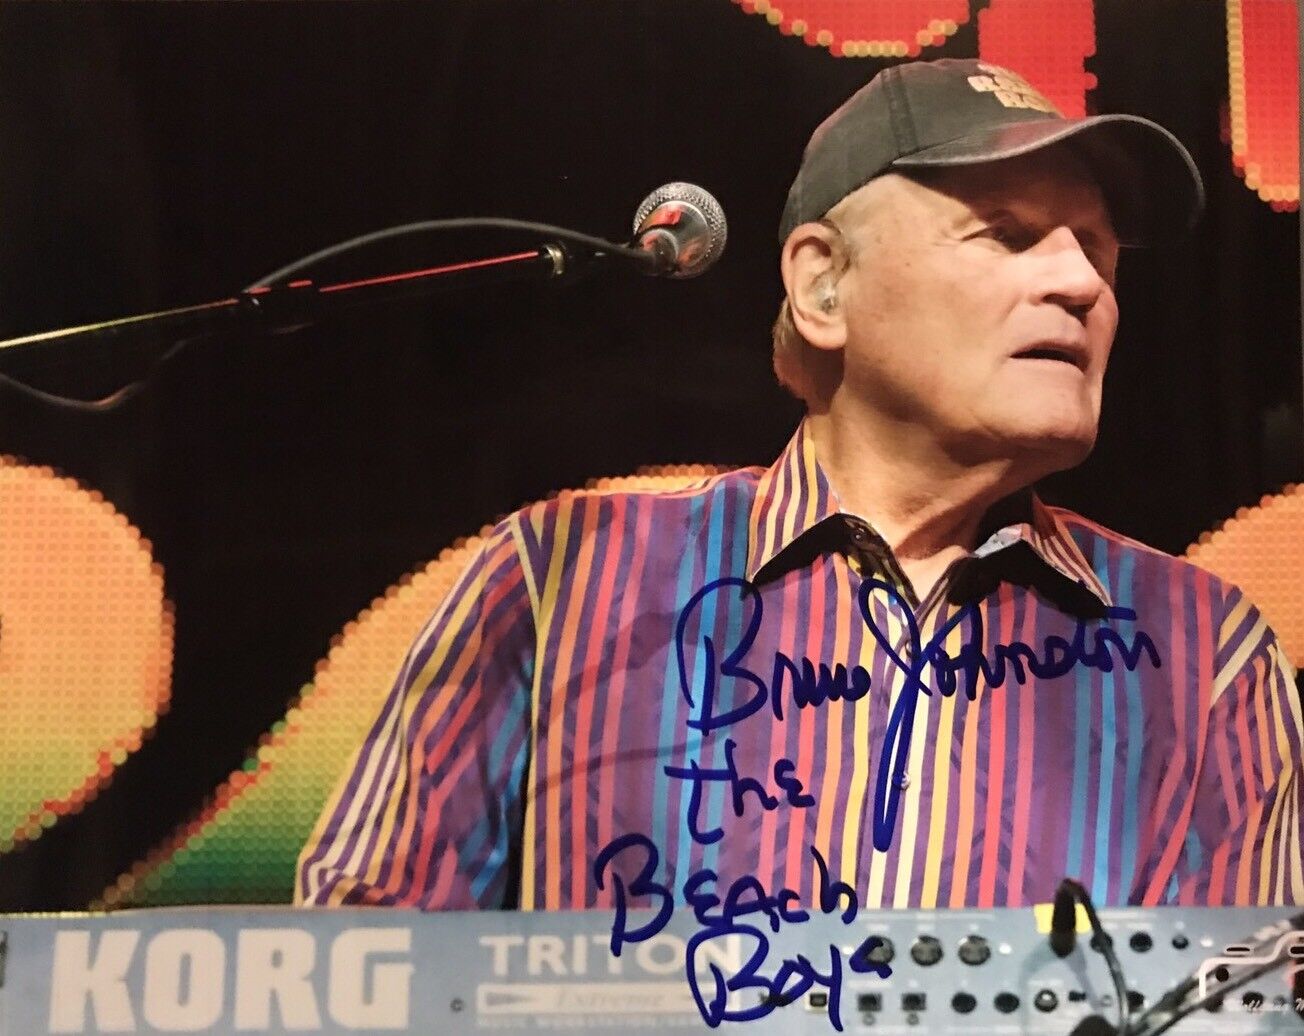 BRUCE JOHNSTON HAND SIGNED 8x10 Photo Poster painting AUTOGRAPHED THE BEACH BOYS ORIGINAL RARE!